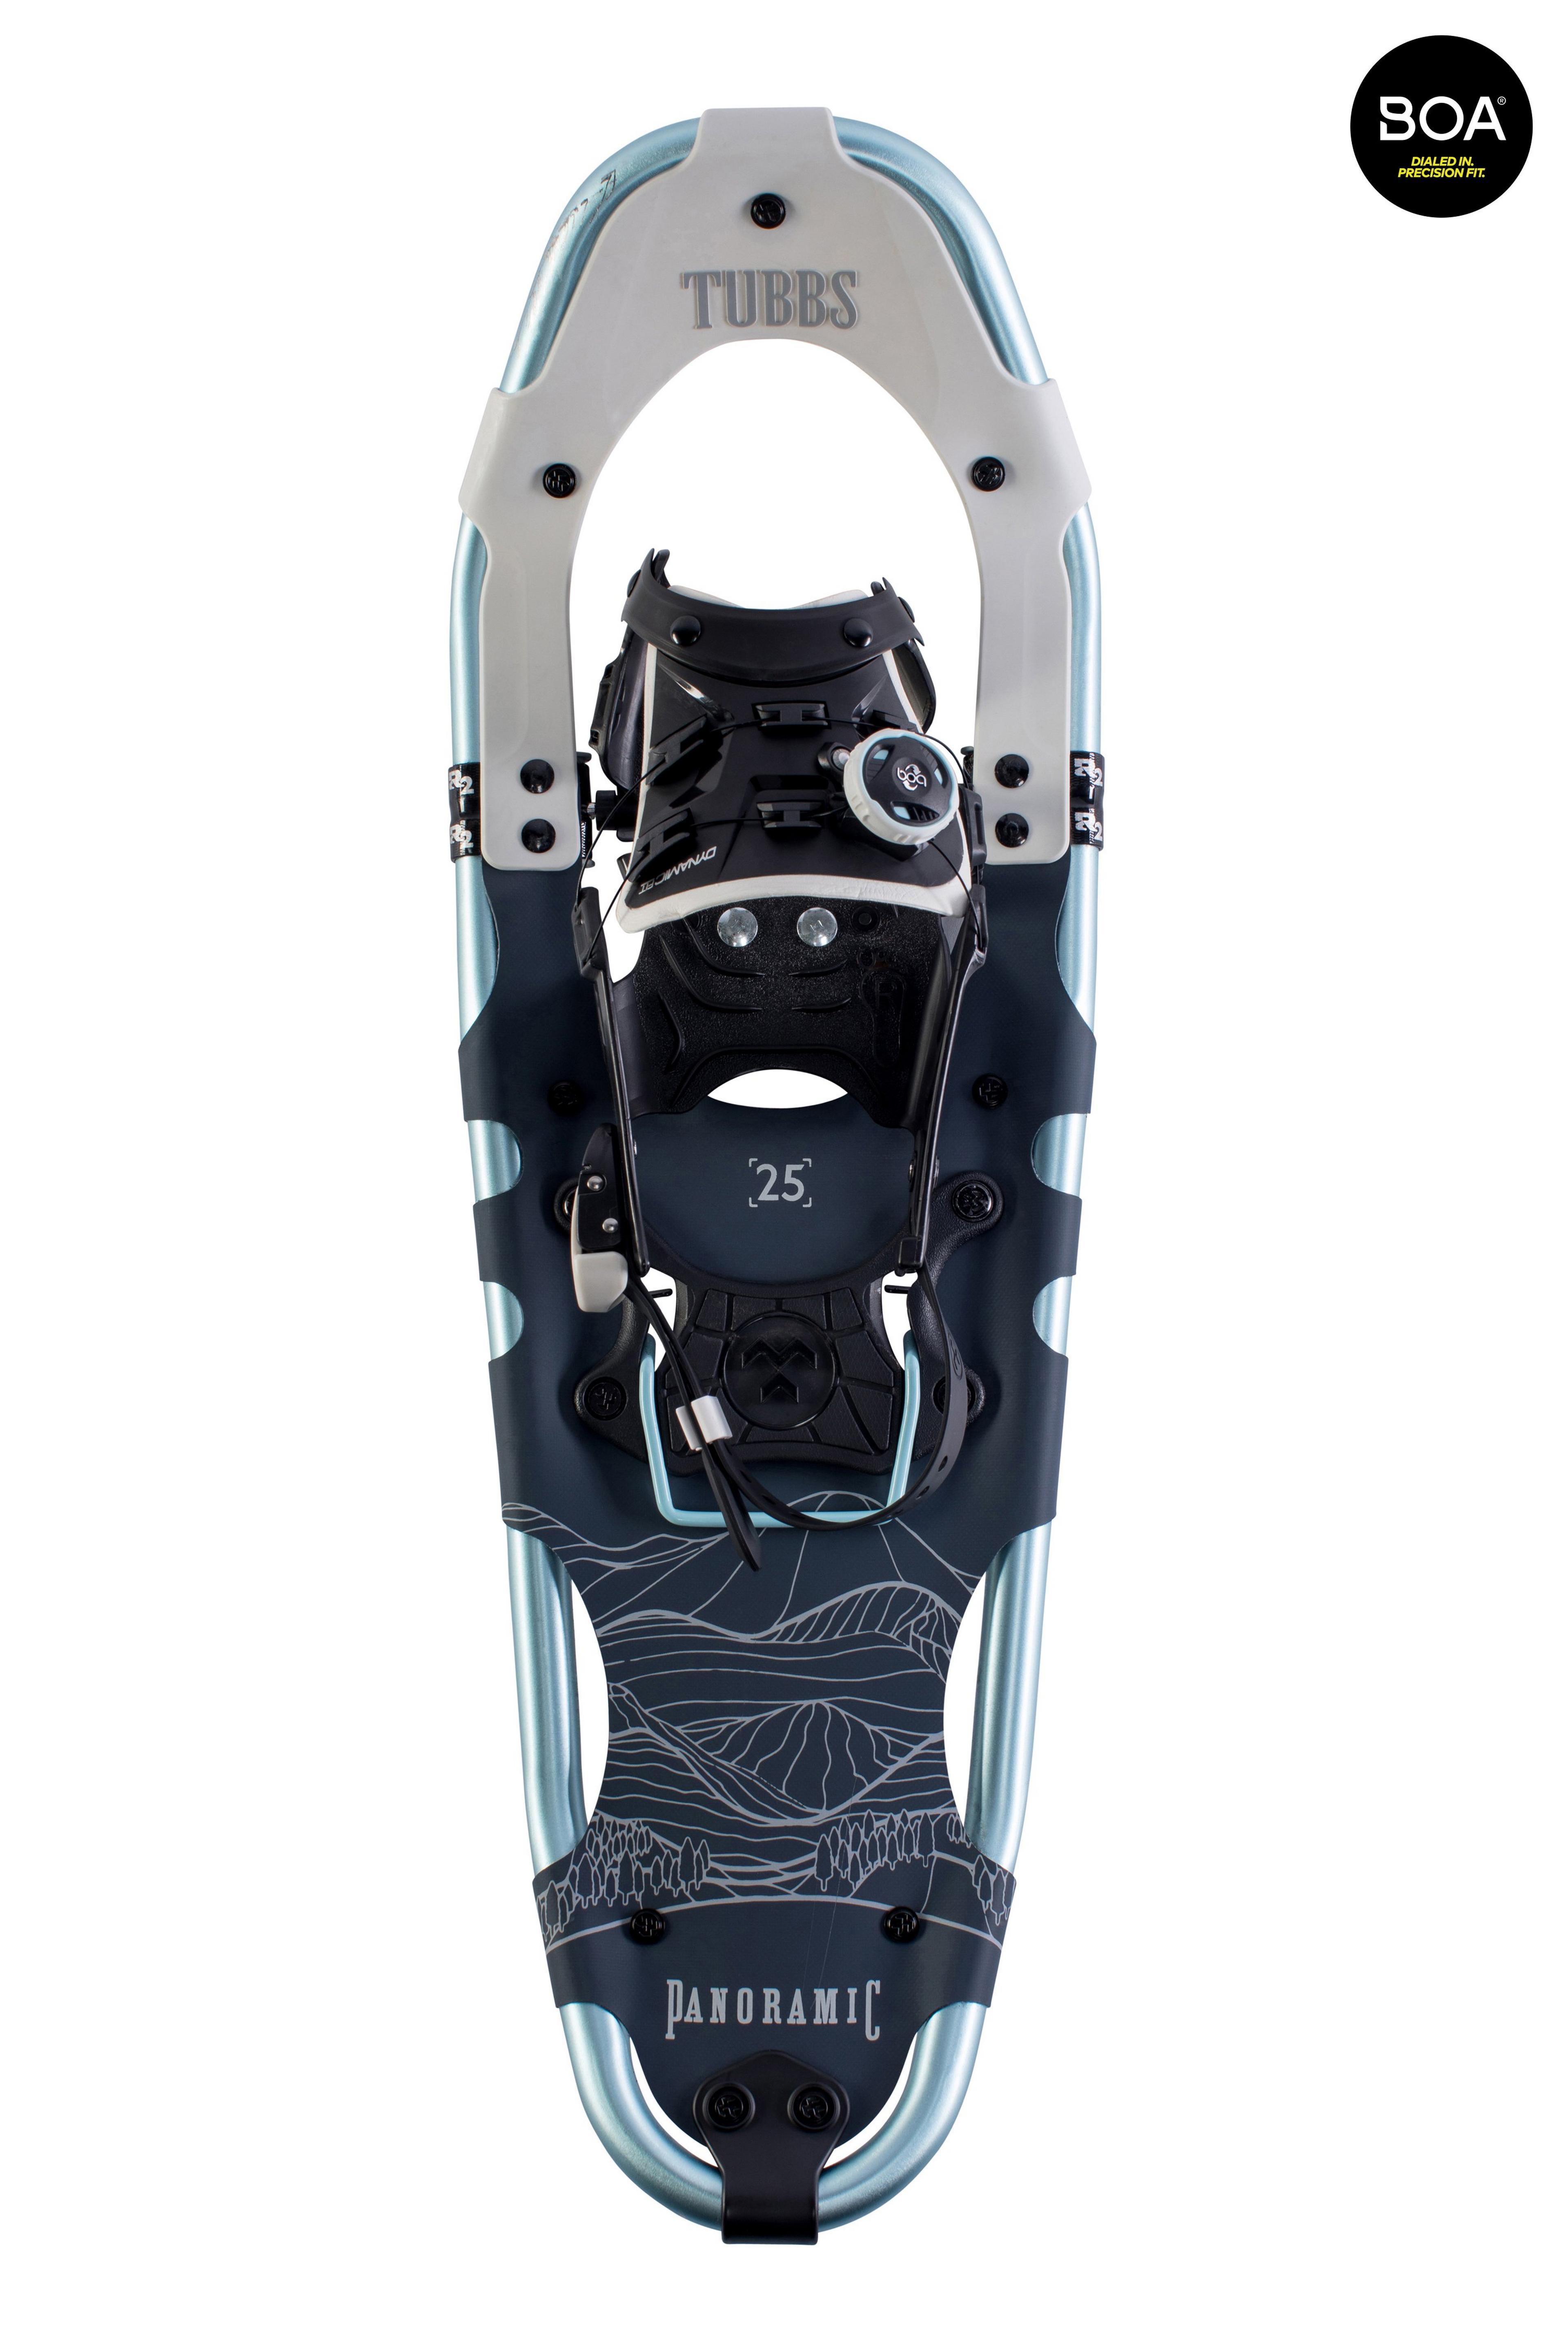 Tubbs Women's Panoramic 21" Snowshoes